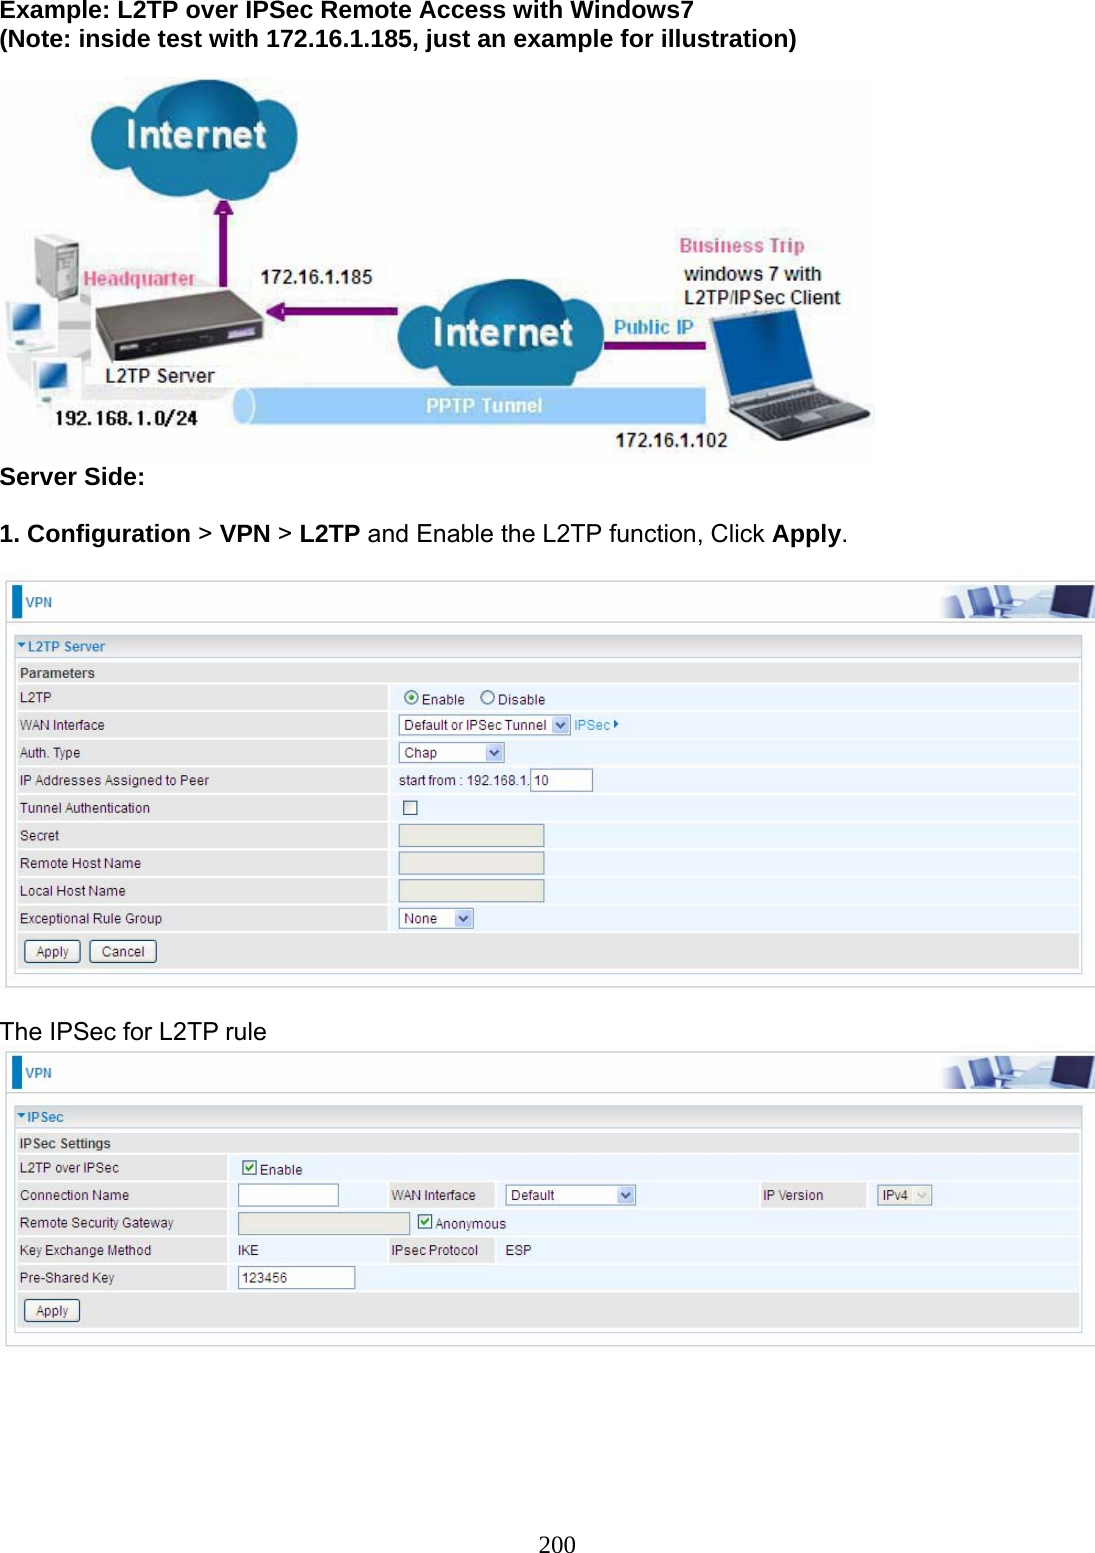 200 Example: L2TP over IPSec Remote Access with Windows7  (Note: inside test with 172.16.1.185, just an example for illustration)   Server Side:  1. Configuration &gt; VPN &gt; L2TP and Enable the L2TP function, Click Apply.    The IPSec for L2TP rule     